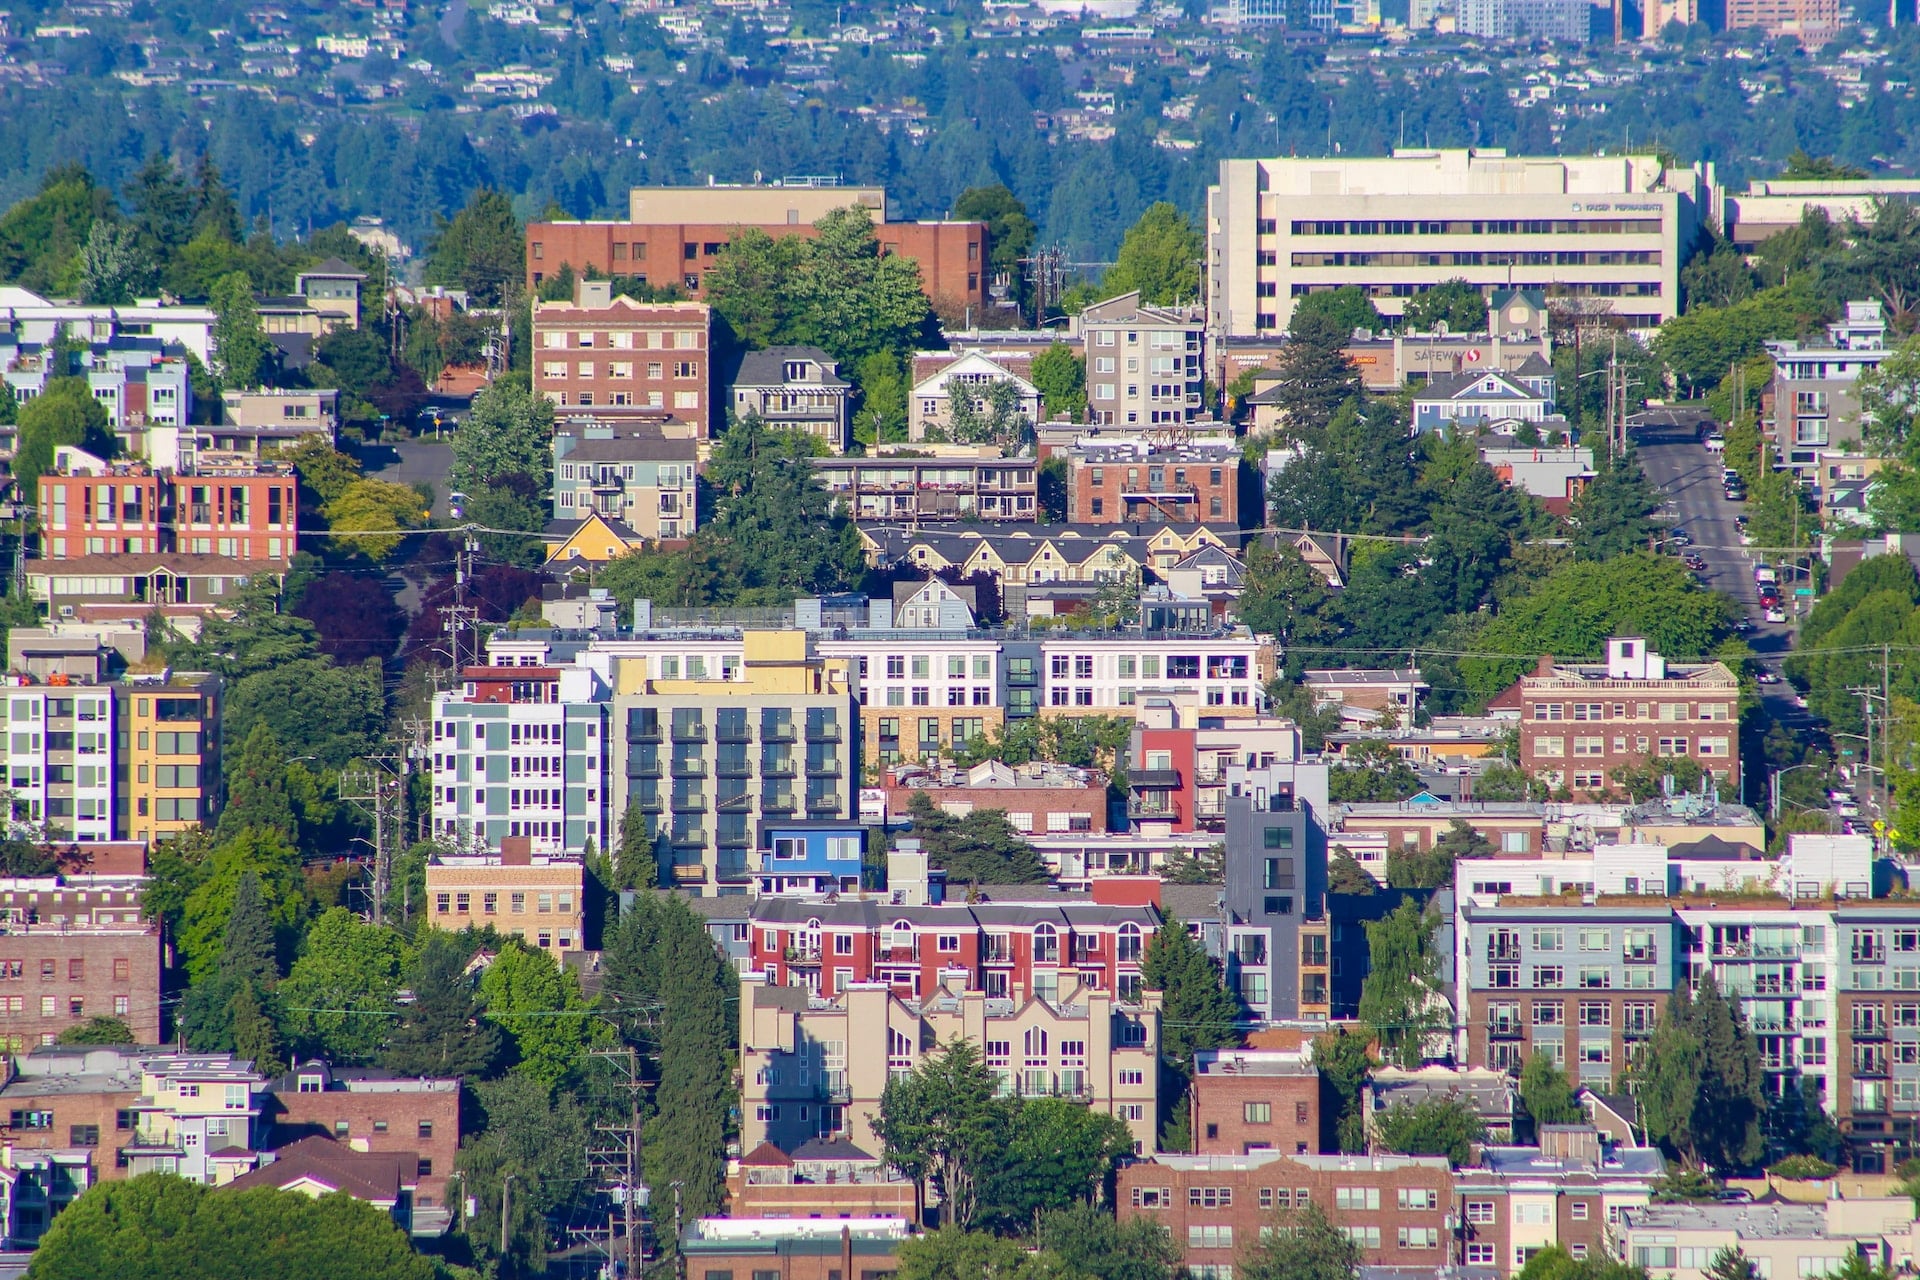 Image of a neighborhood with trees and green spaces illustrates how housing can contribute to health